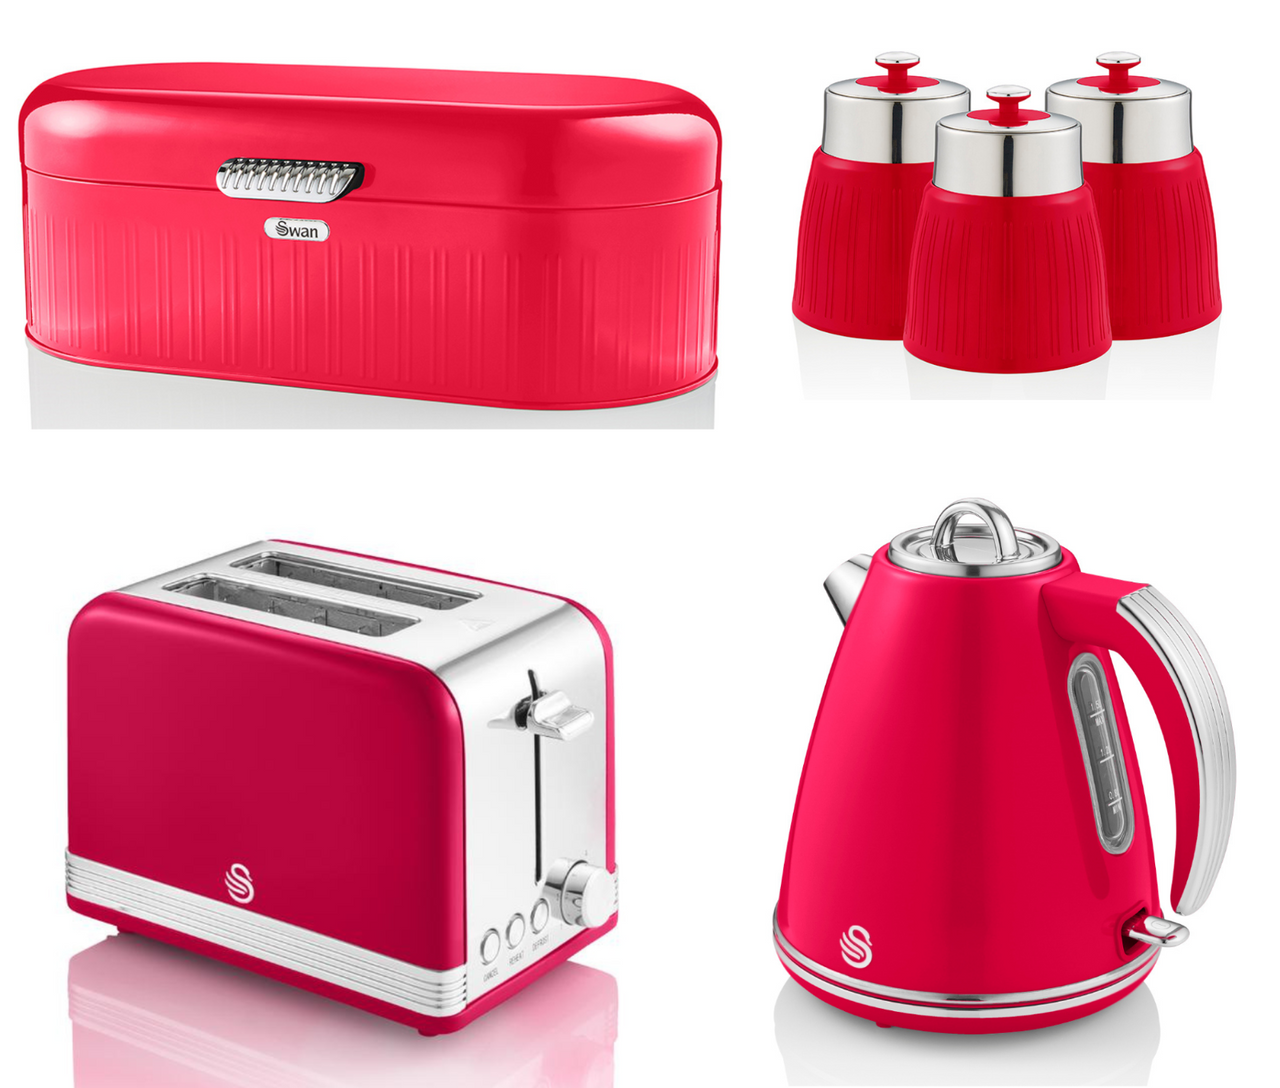 Swan Retro Red Kettle 2 Slice Toaster Breadbin 3 Canisters Matching Kitchen Set